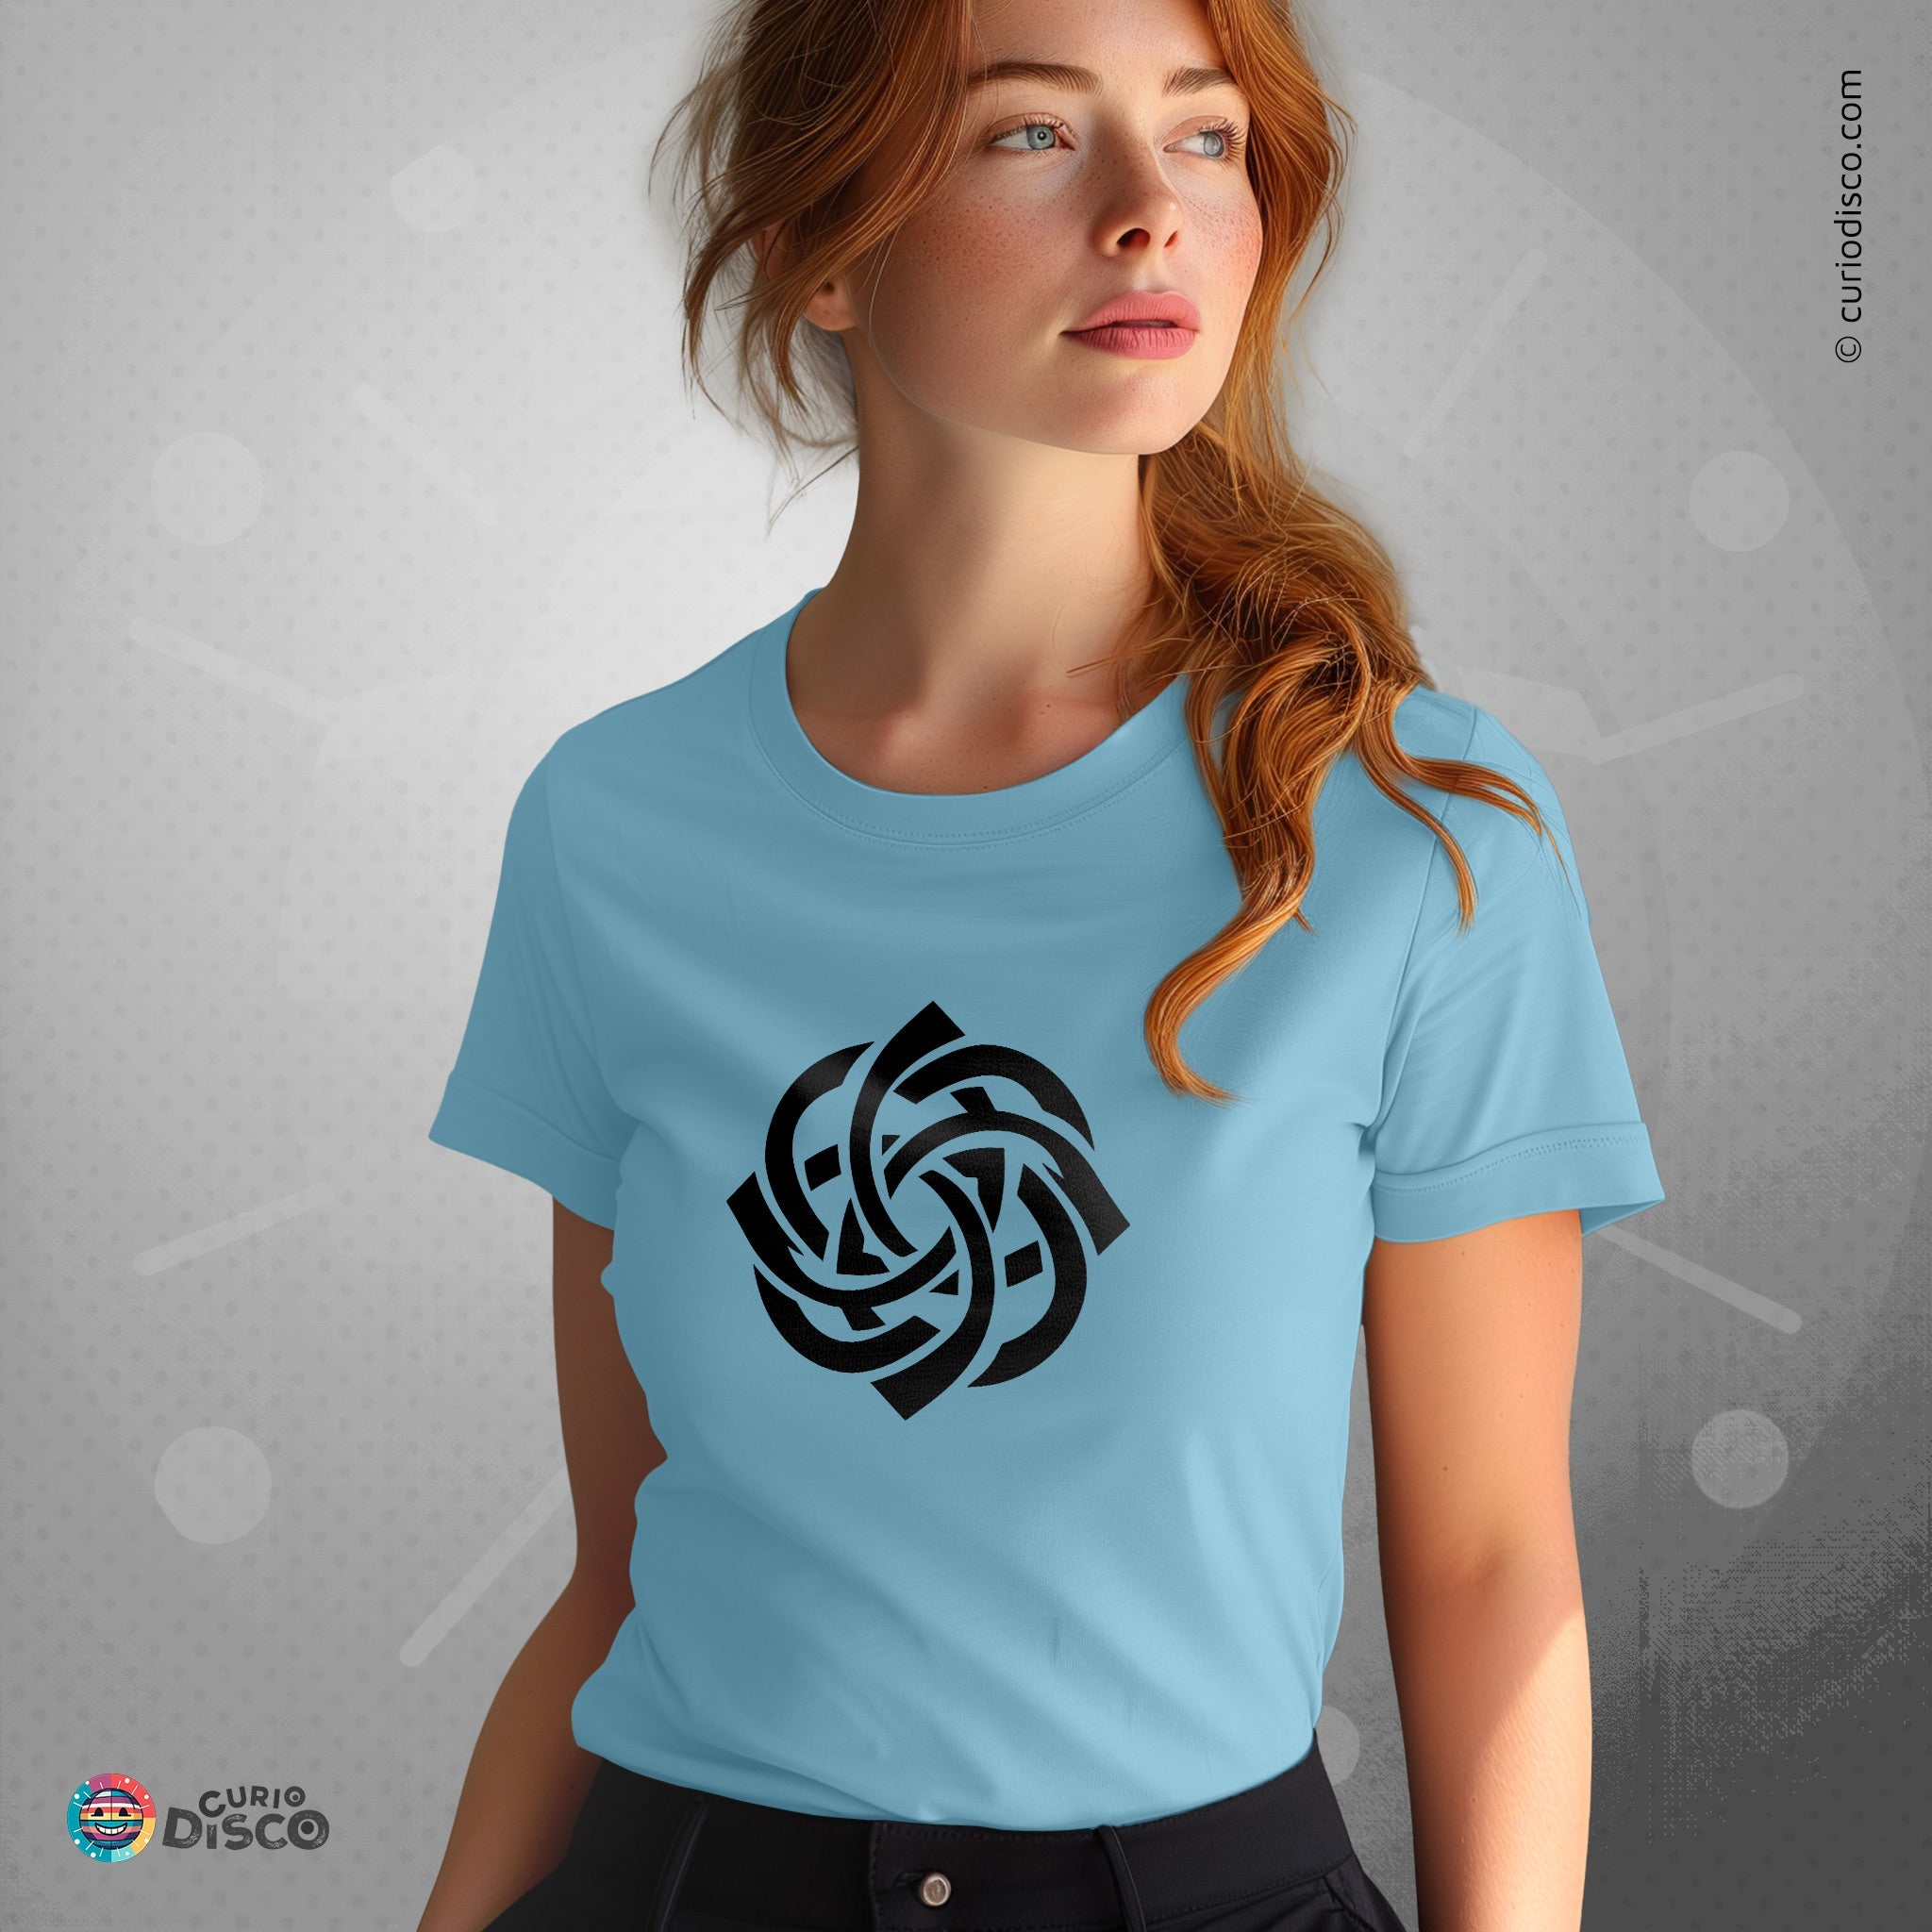 Light blue tree of life yoga shirt with celtic knot, ideal as love knot viking nordic celtic gifts, gifts for wife, yoga gifts for her, plus size clothing for mystical cottage core workout, and gifts for mom.